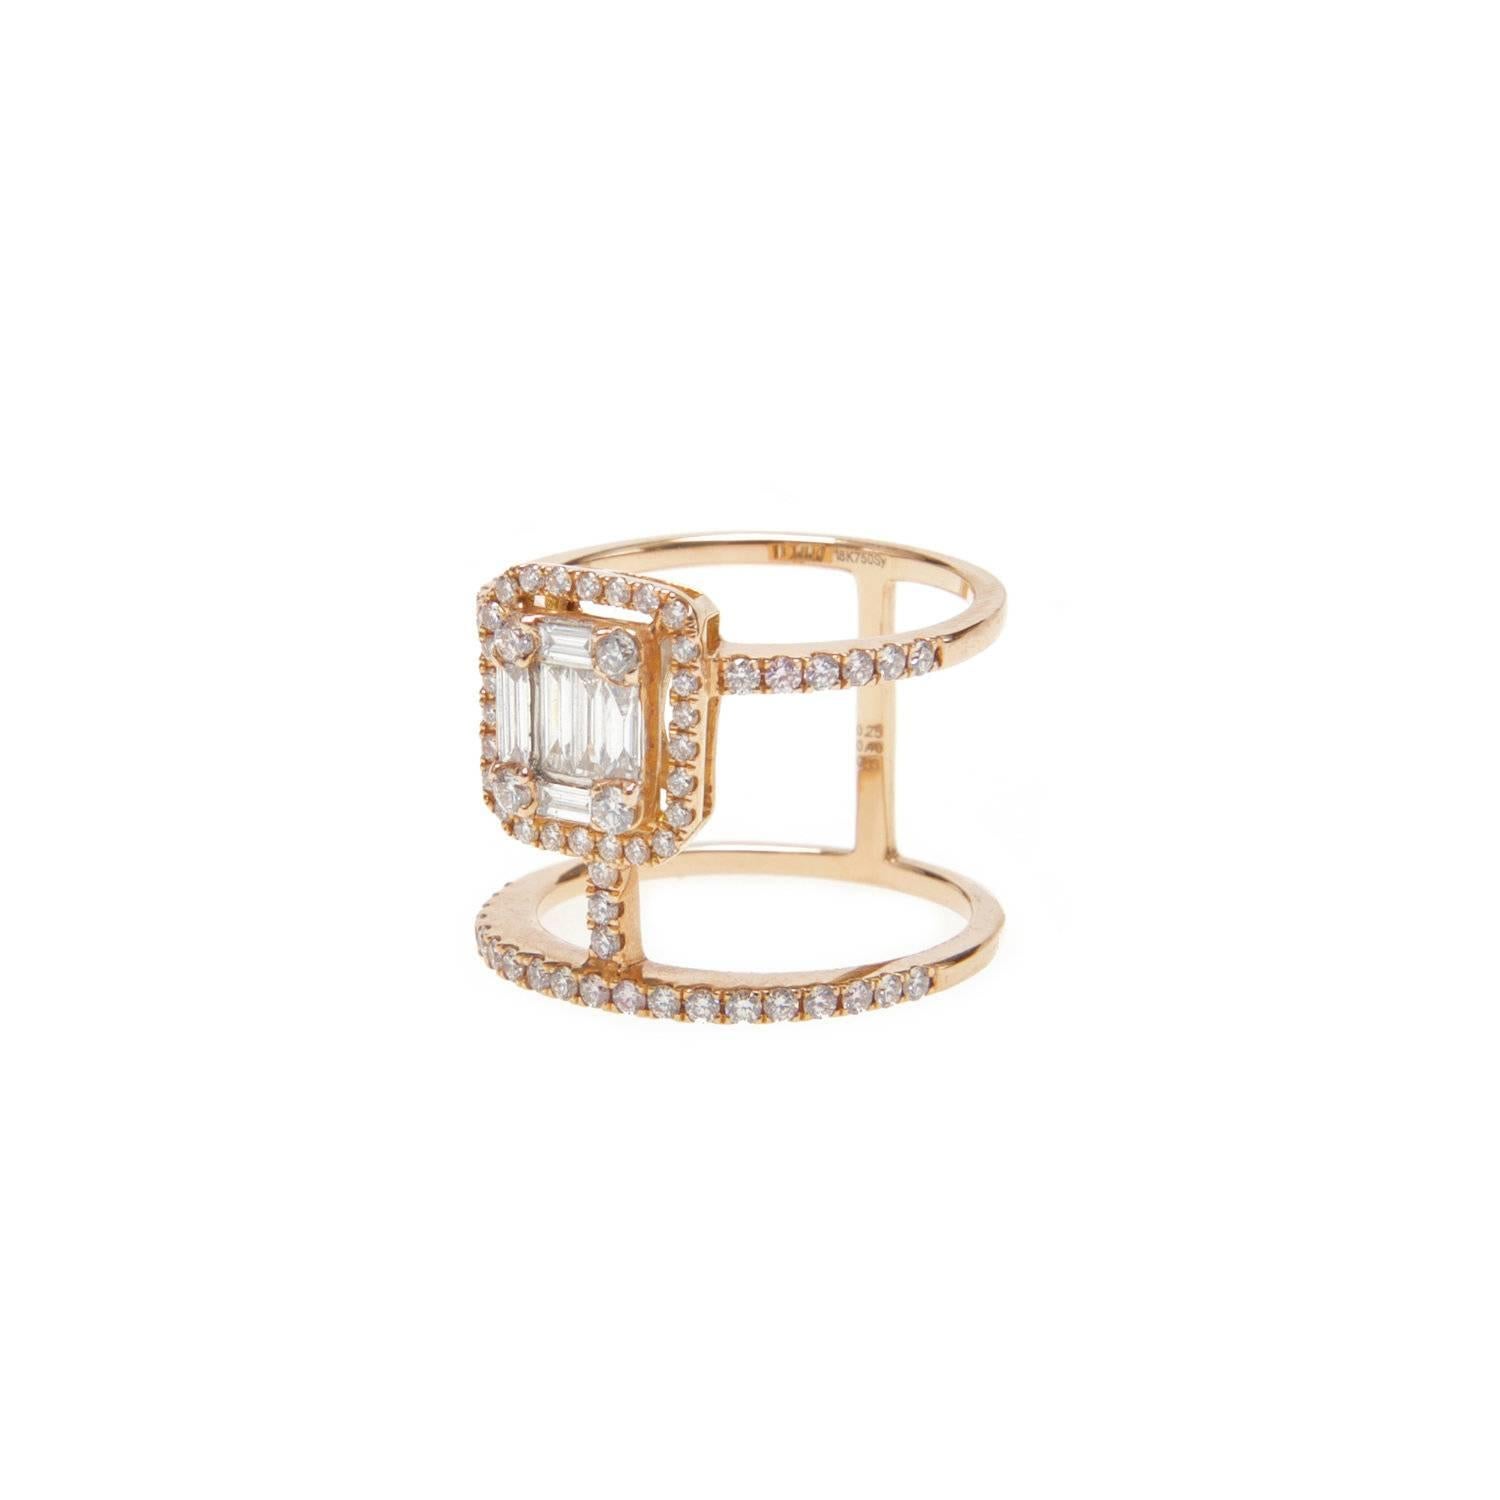 Balancing classic aesthetics with modern sensibilities, Ri Noor's Double Bar Diamond Ring is designed to elevate any outfit, no matter the occasion. The ring consists of a grouping of baguette diamonds with four round diamonds surrounded by